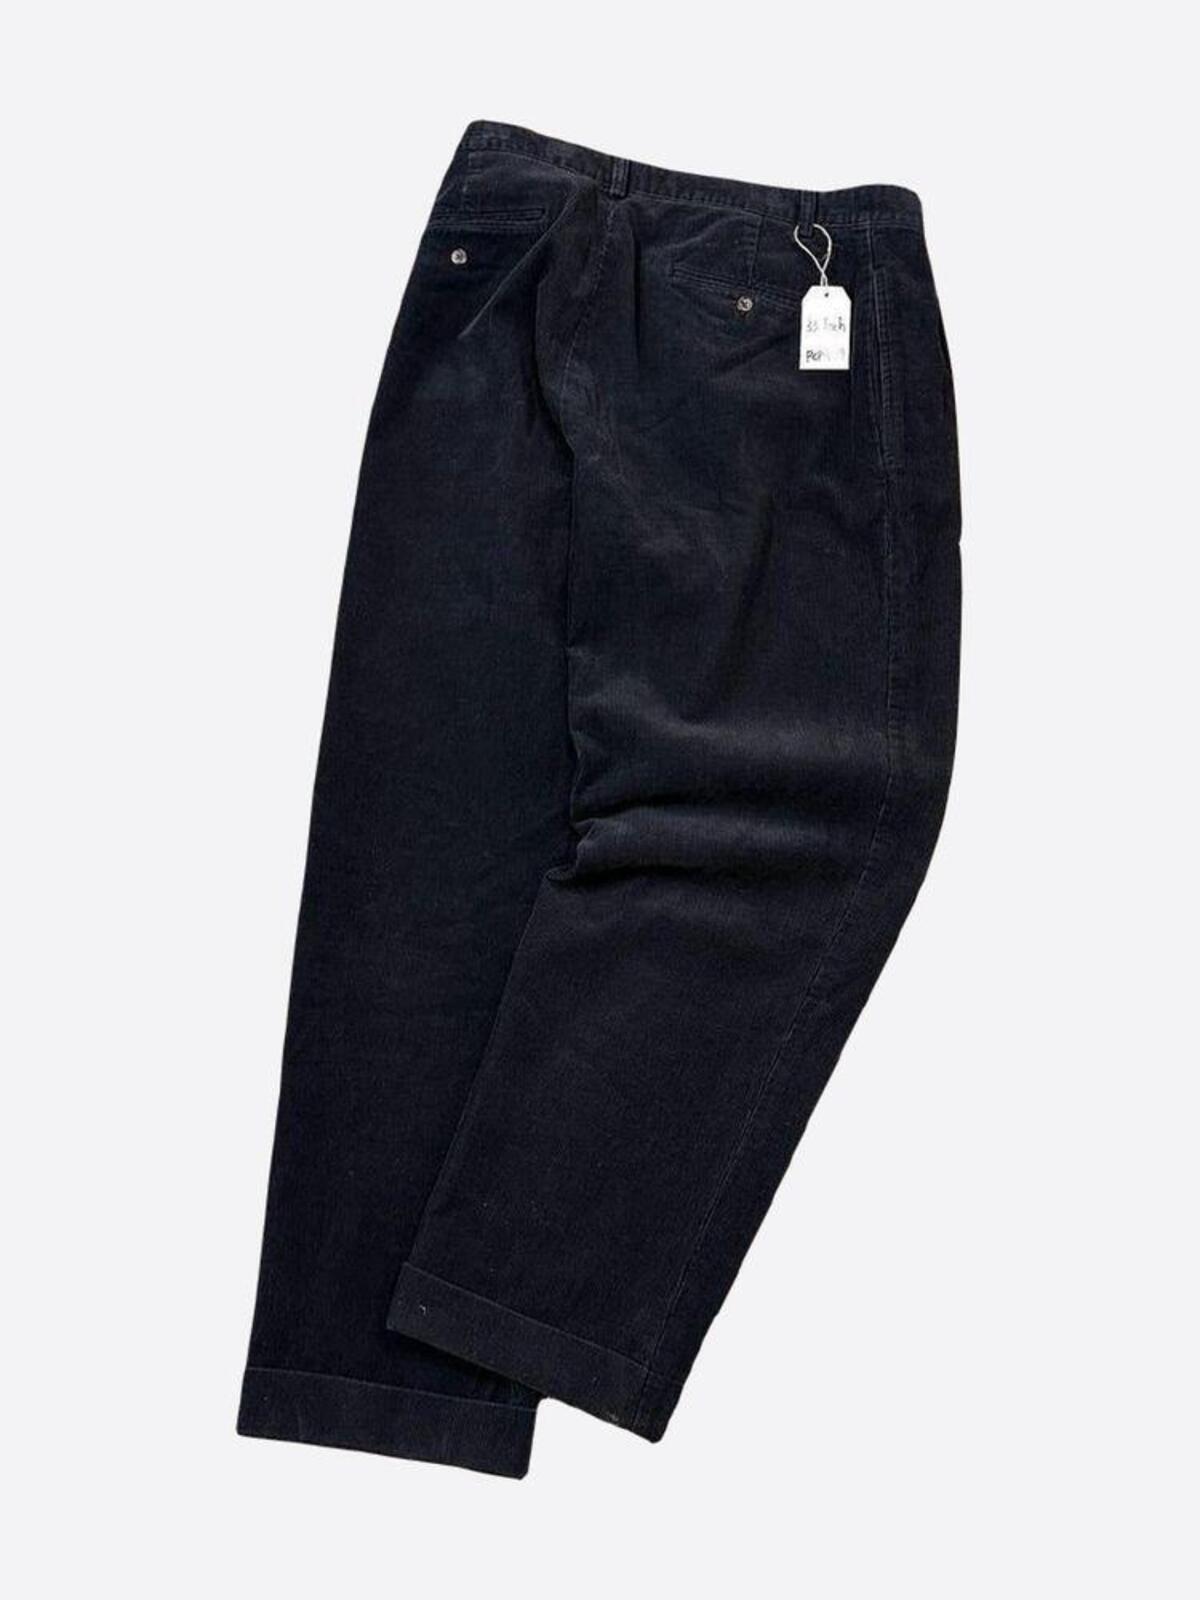 2-Tuck Black Corduroy Trouser (33inch) - With Homie 위드호미